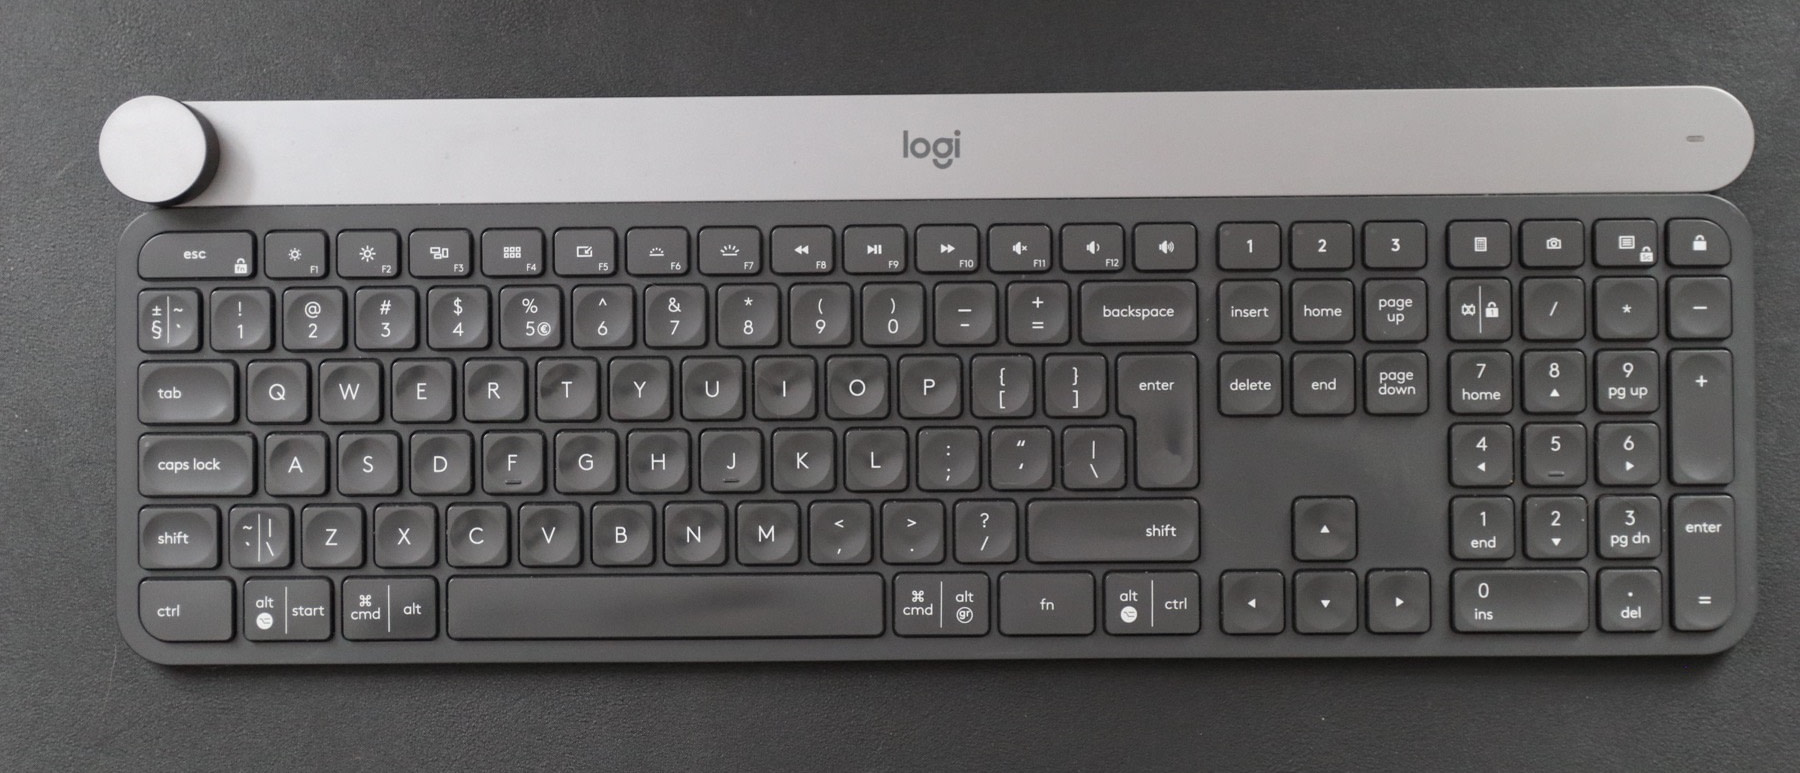 best wireless keyboard and mouse 2017 for mac